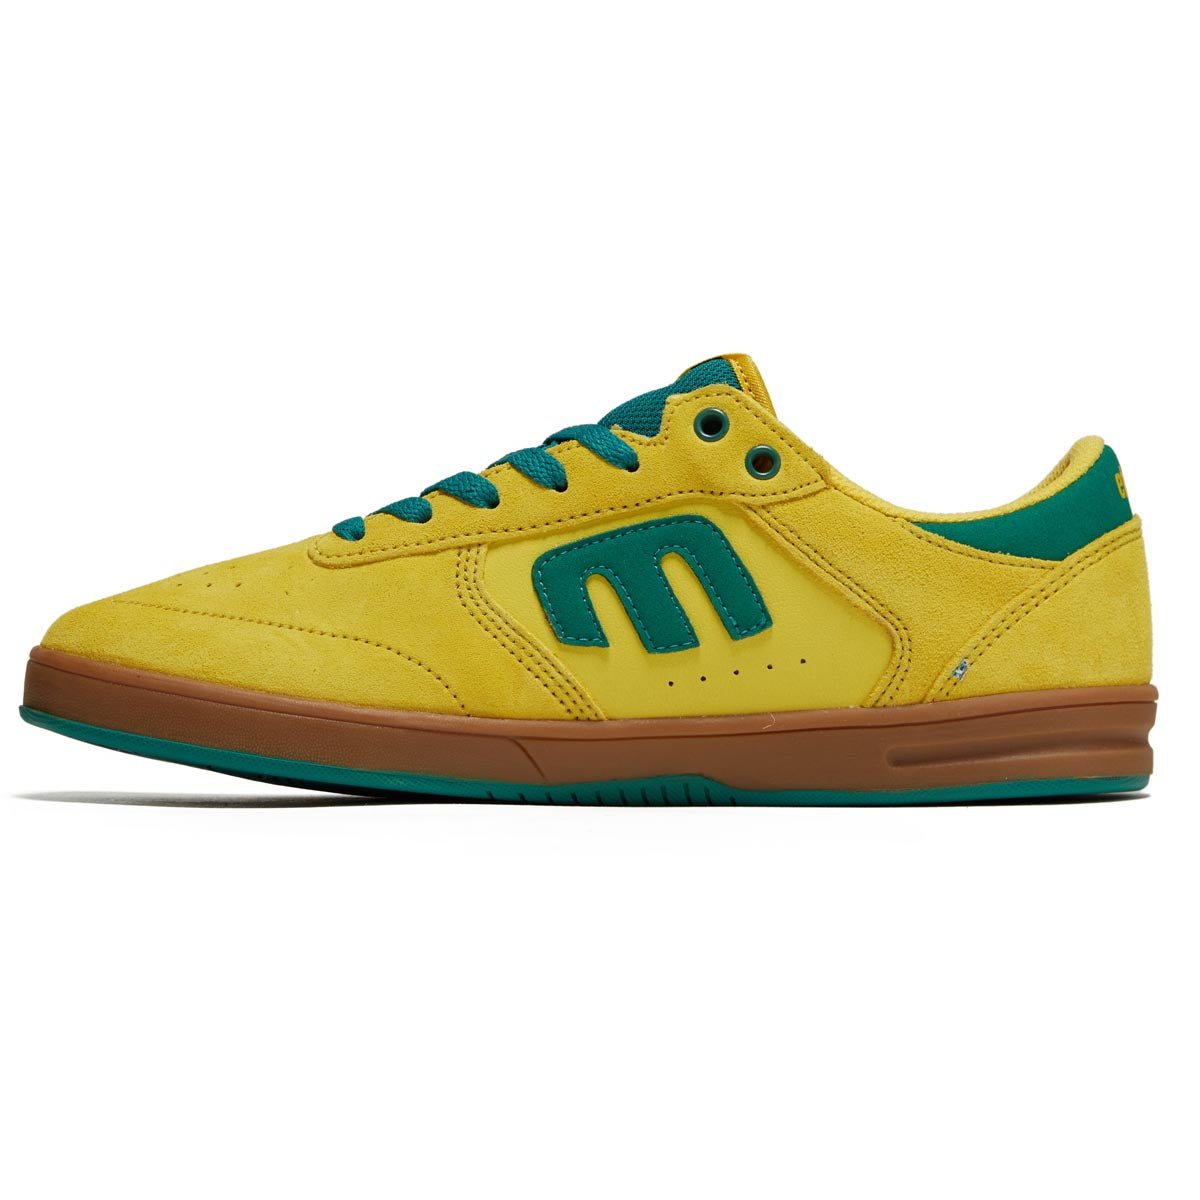 Etnies Windrow Shoes - Yellow image 2